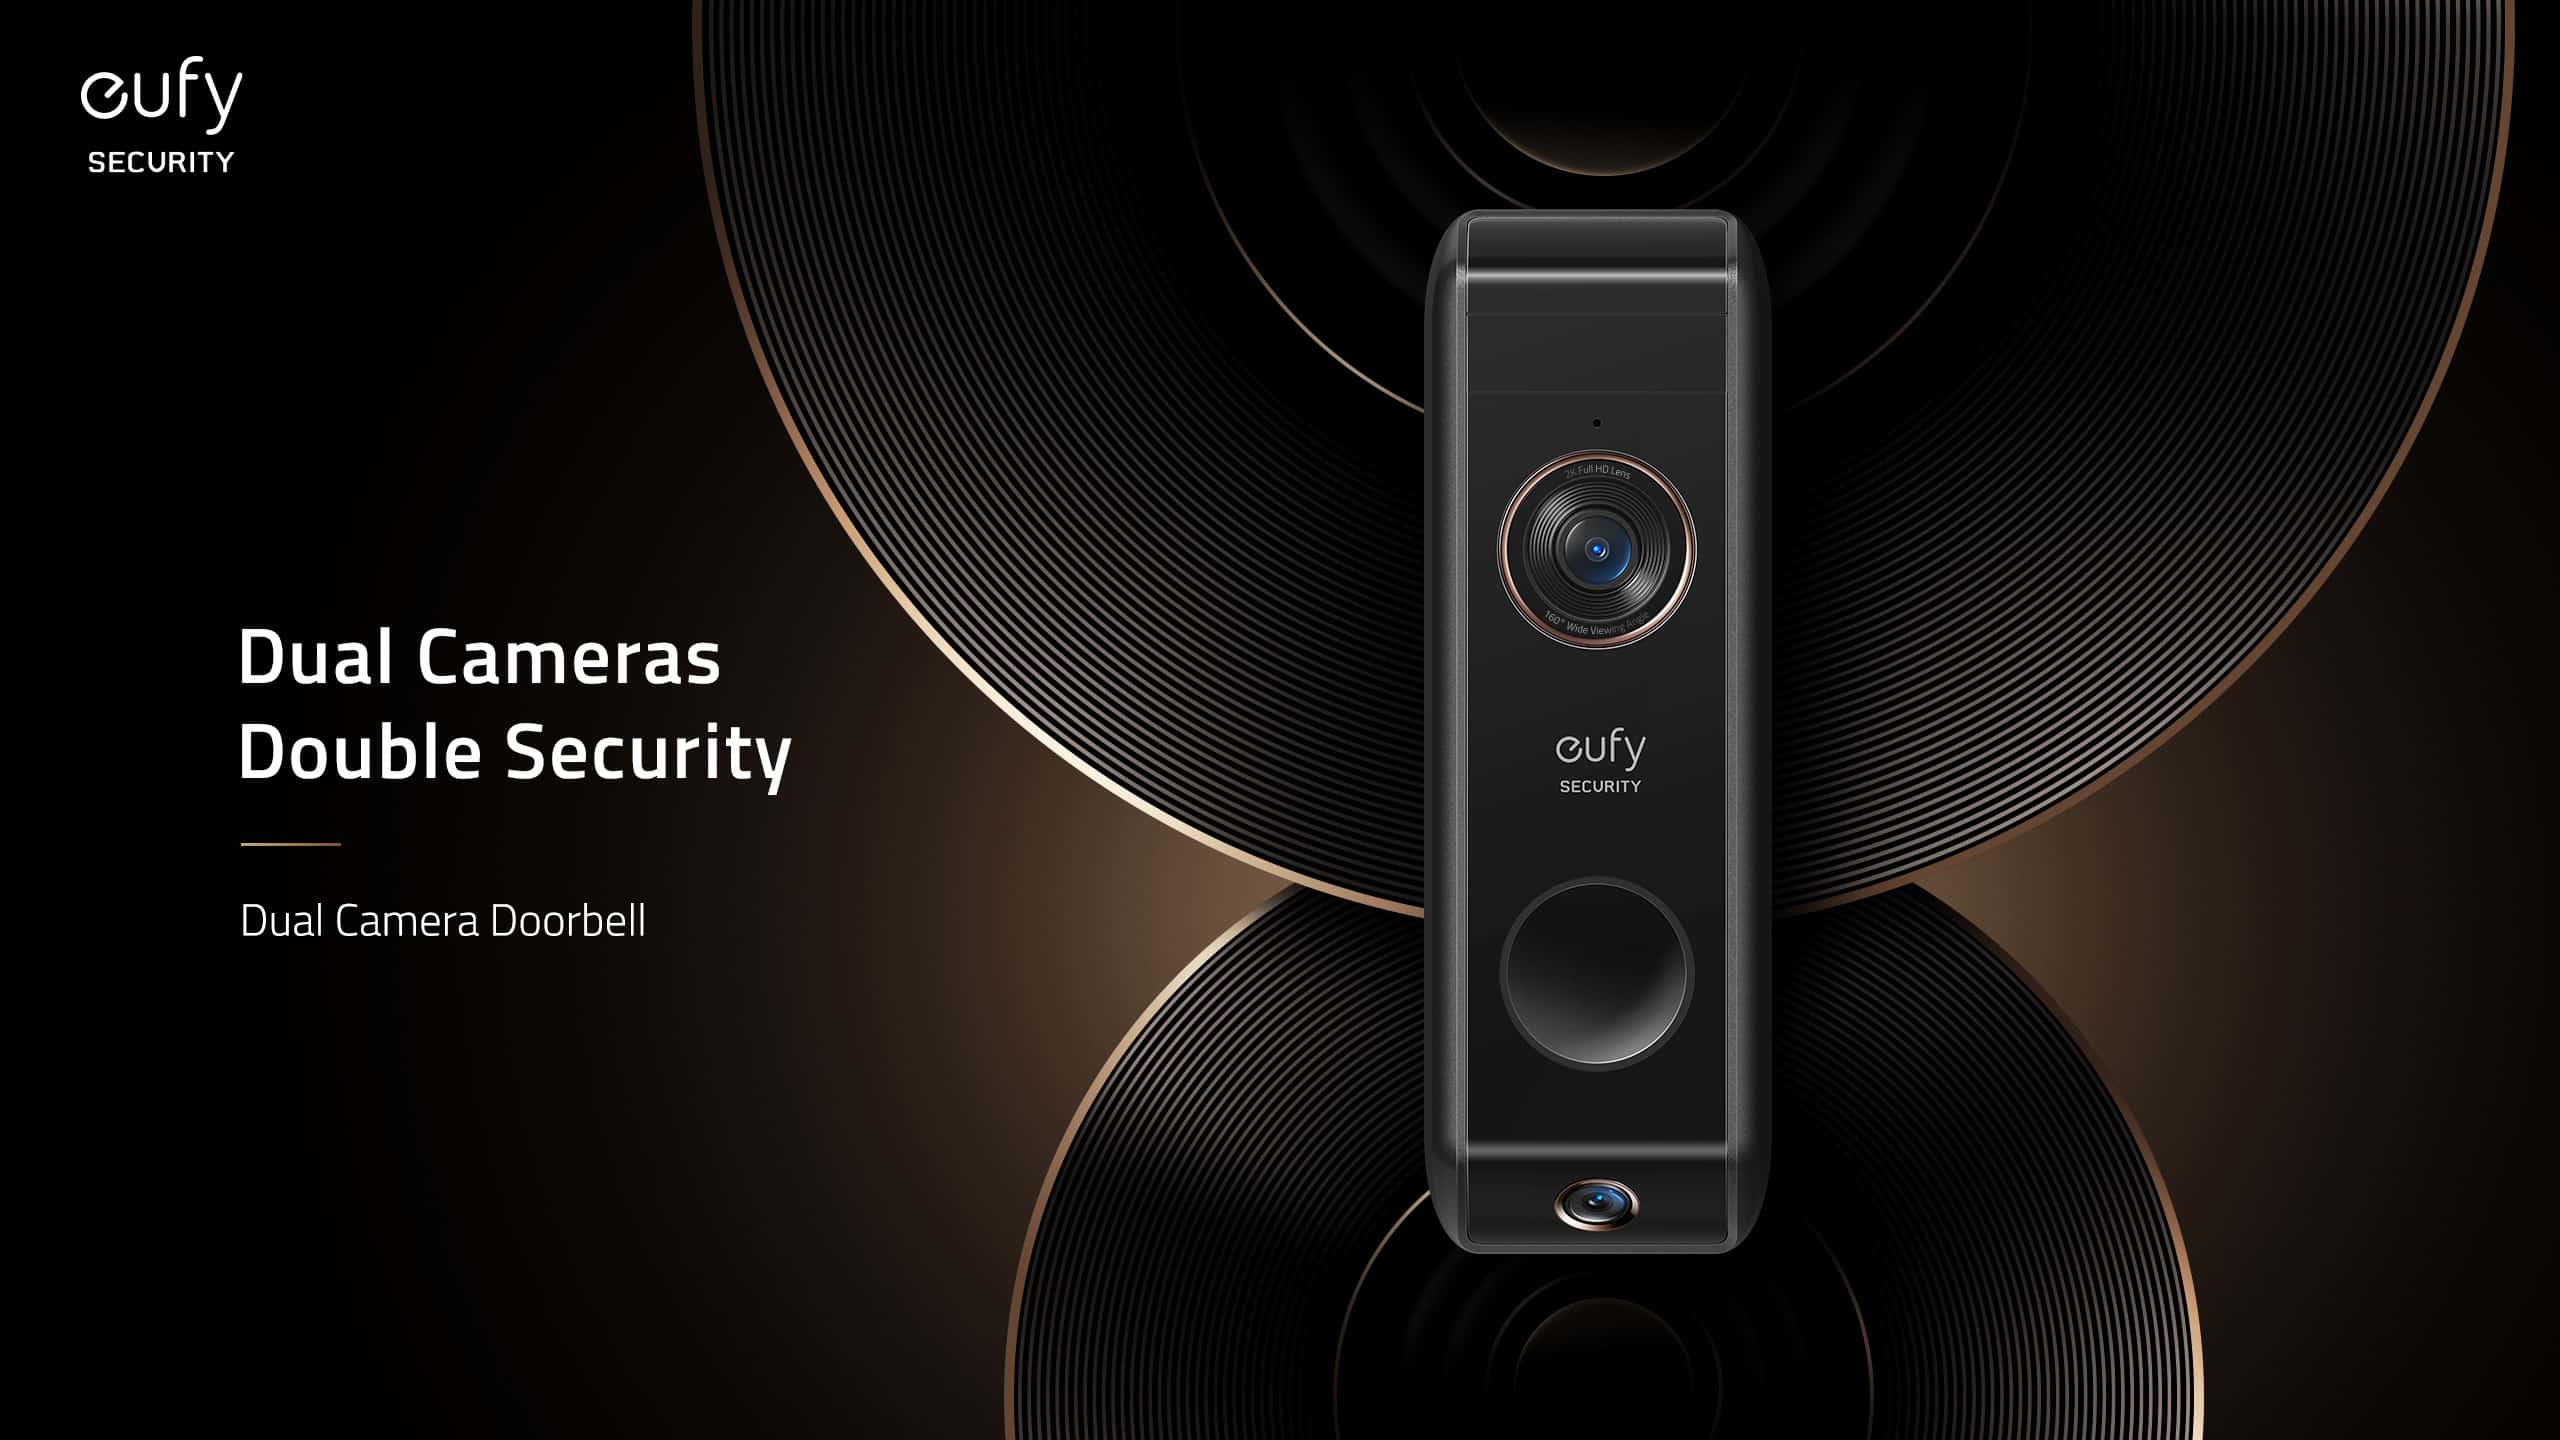 eufy Security launches a new Video Doorbell with two cameras